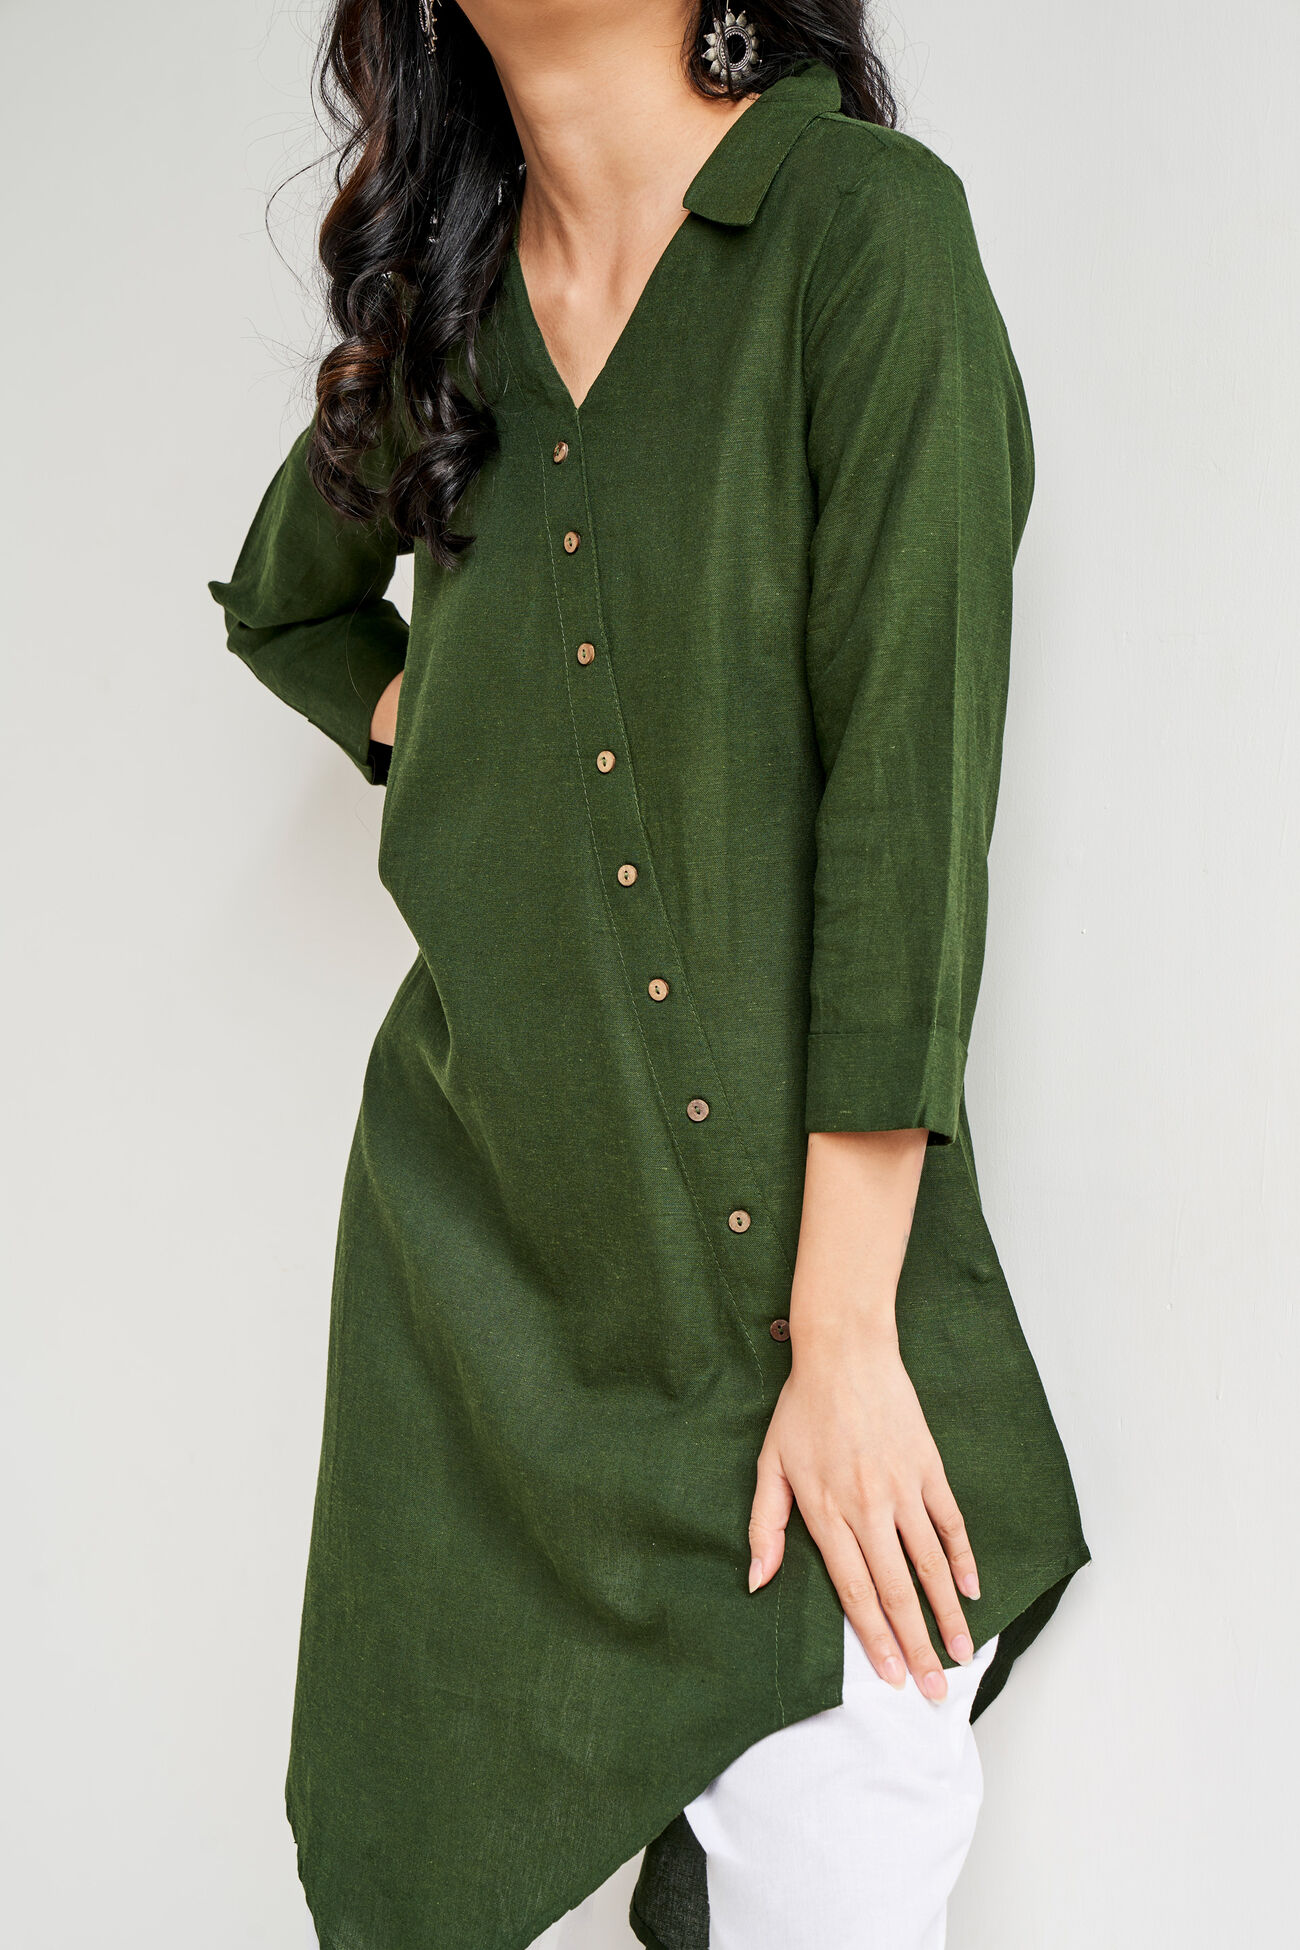 Solid Asymmetric Tunic, Olive, image 5